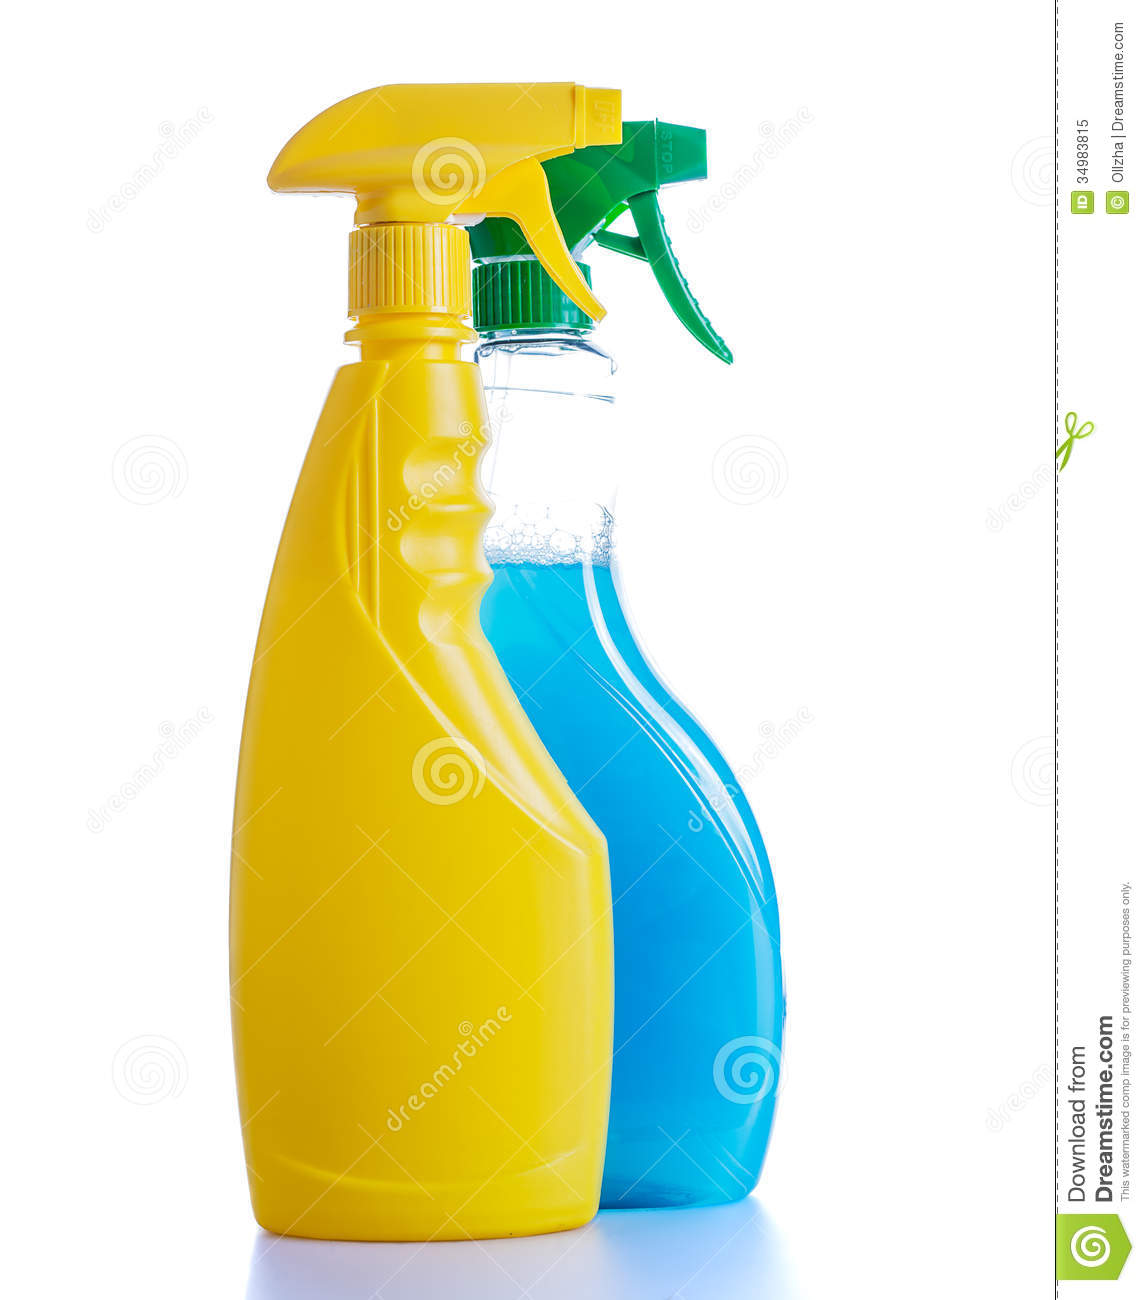 Two Cleaning Spray Bottles Royalty Free Stock Photo   Image  34983815